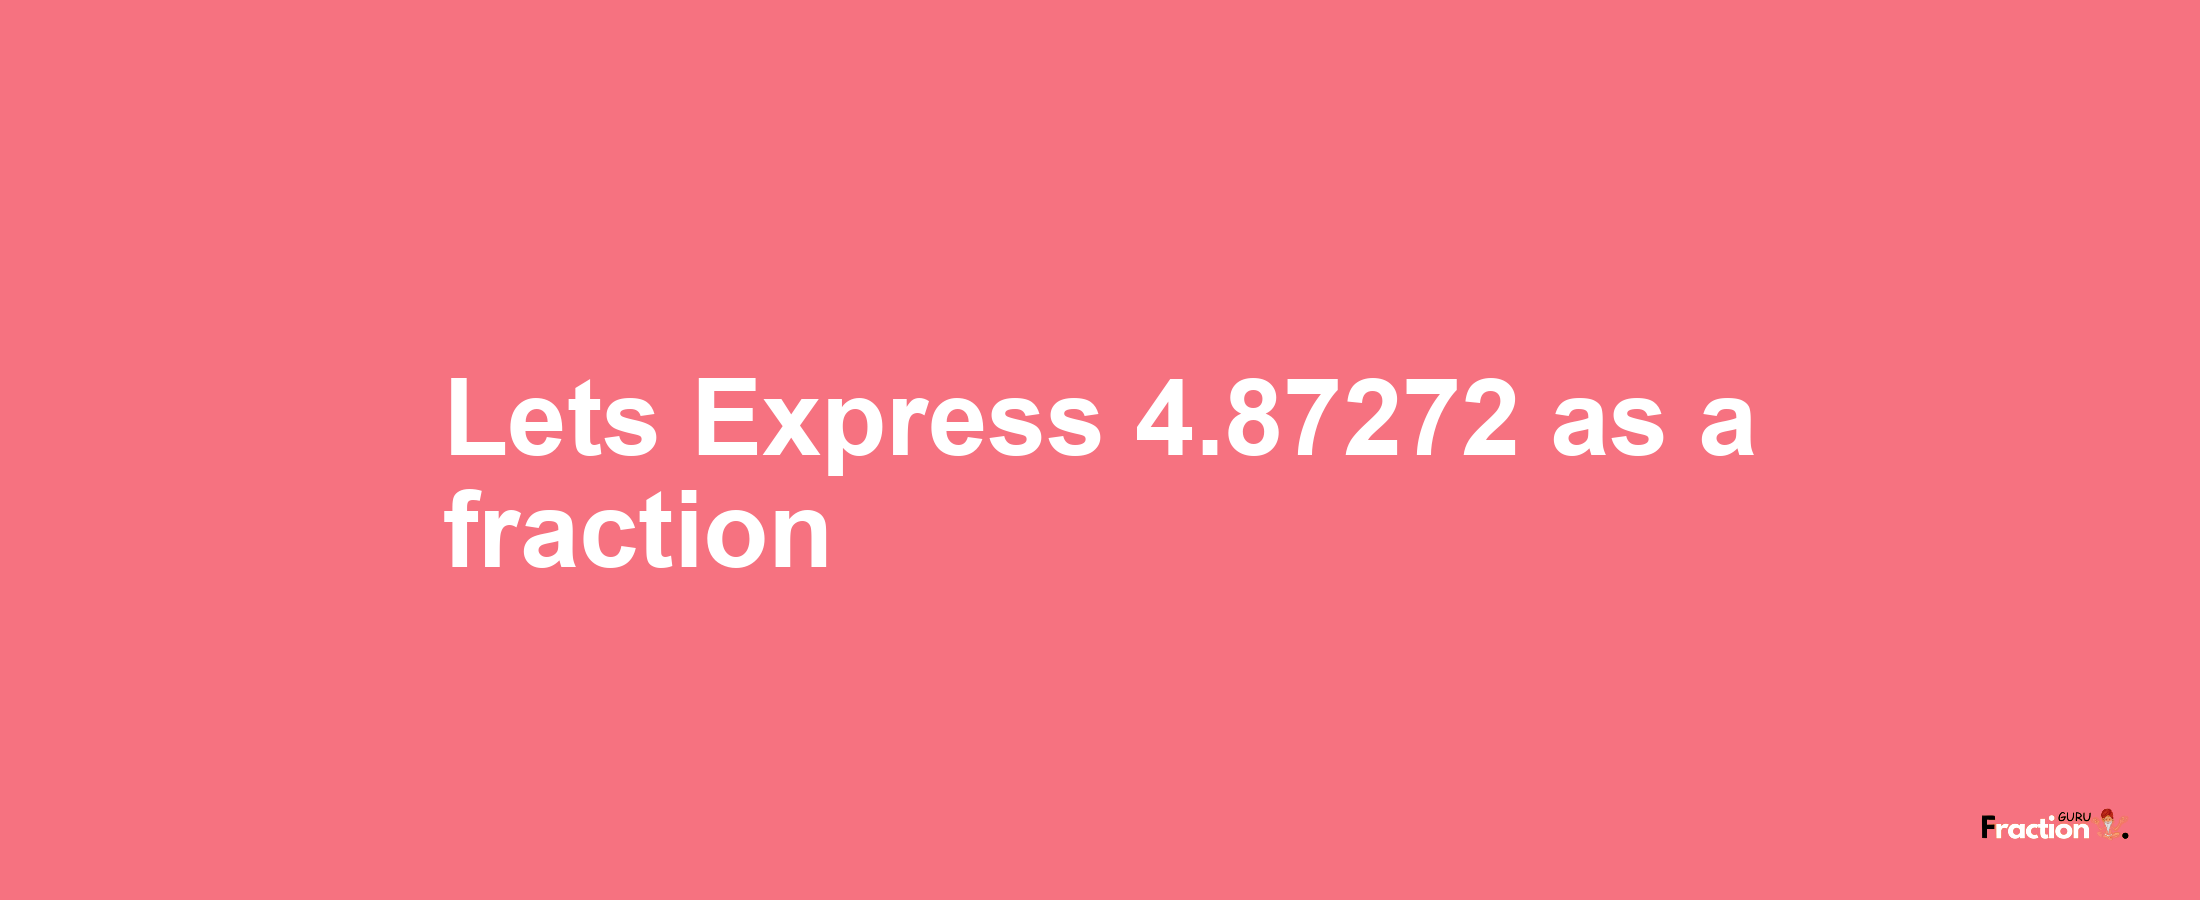 Lets Express 4.87272 as afraction